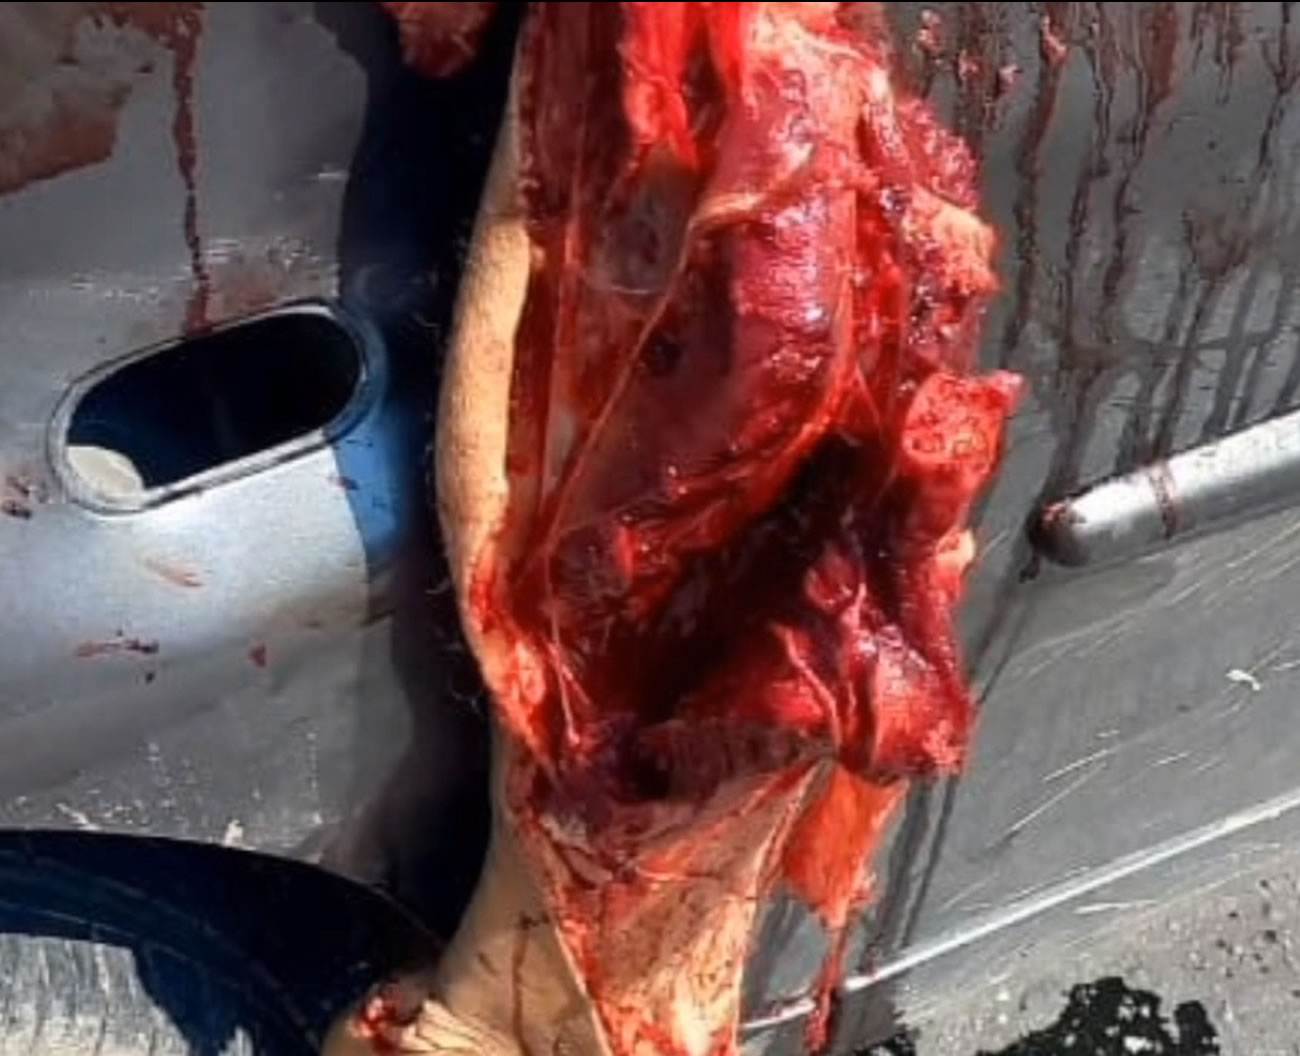 A severed leg hung on the car door